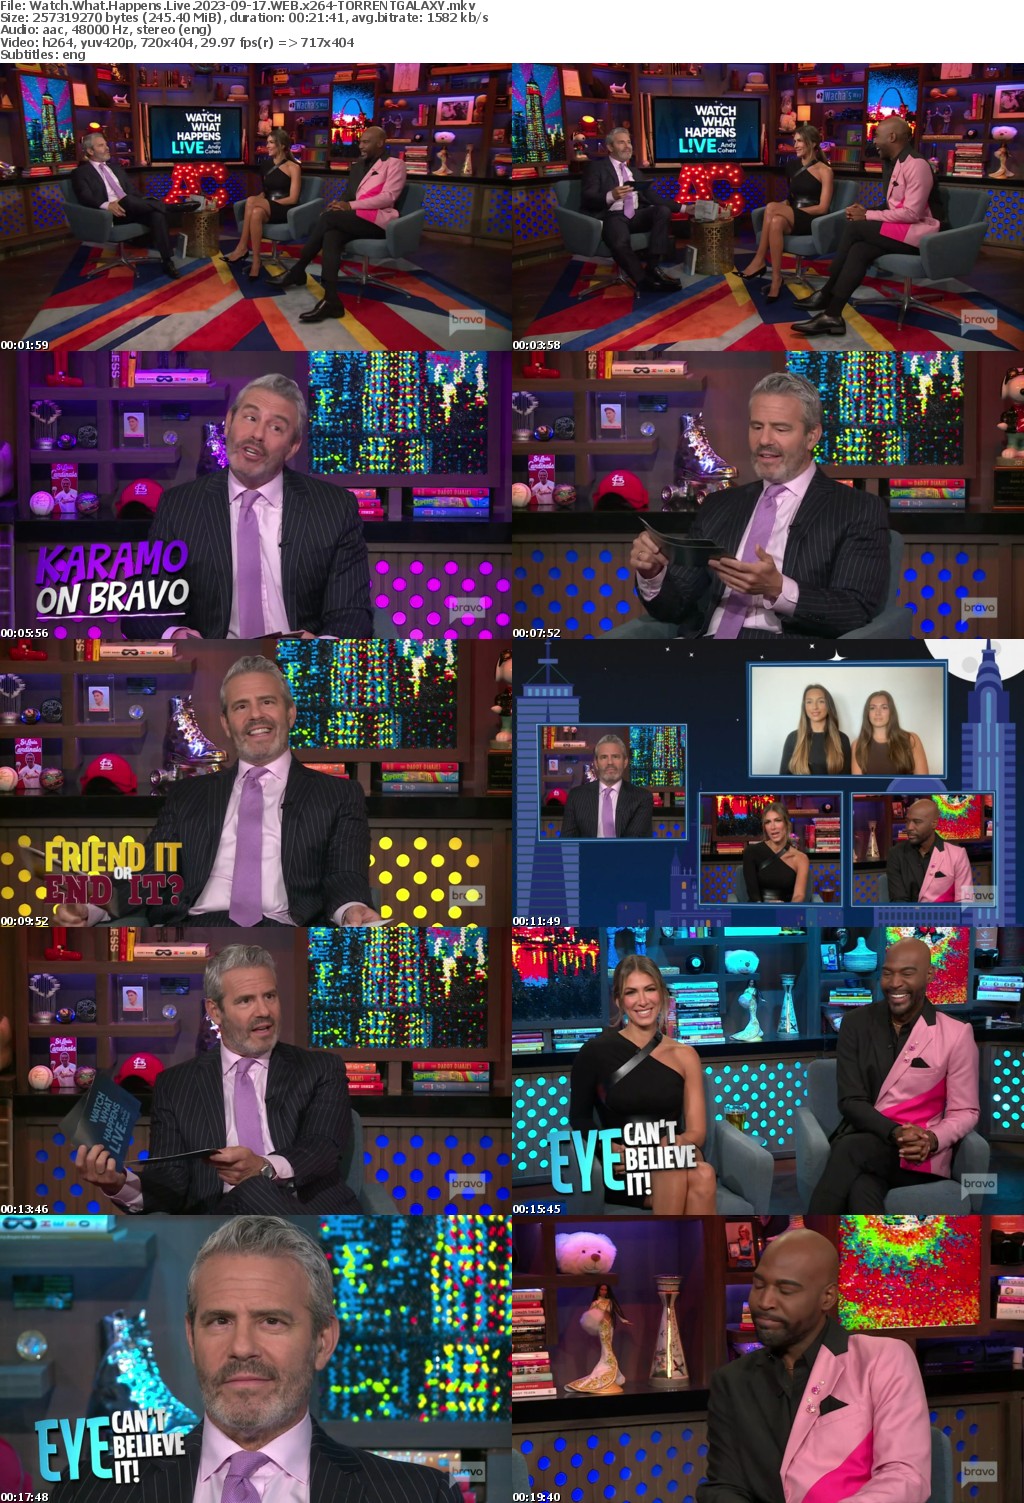 Watch What Happens Live 2023-09-17 WEB x264-GALAXY